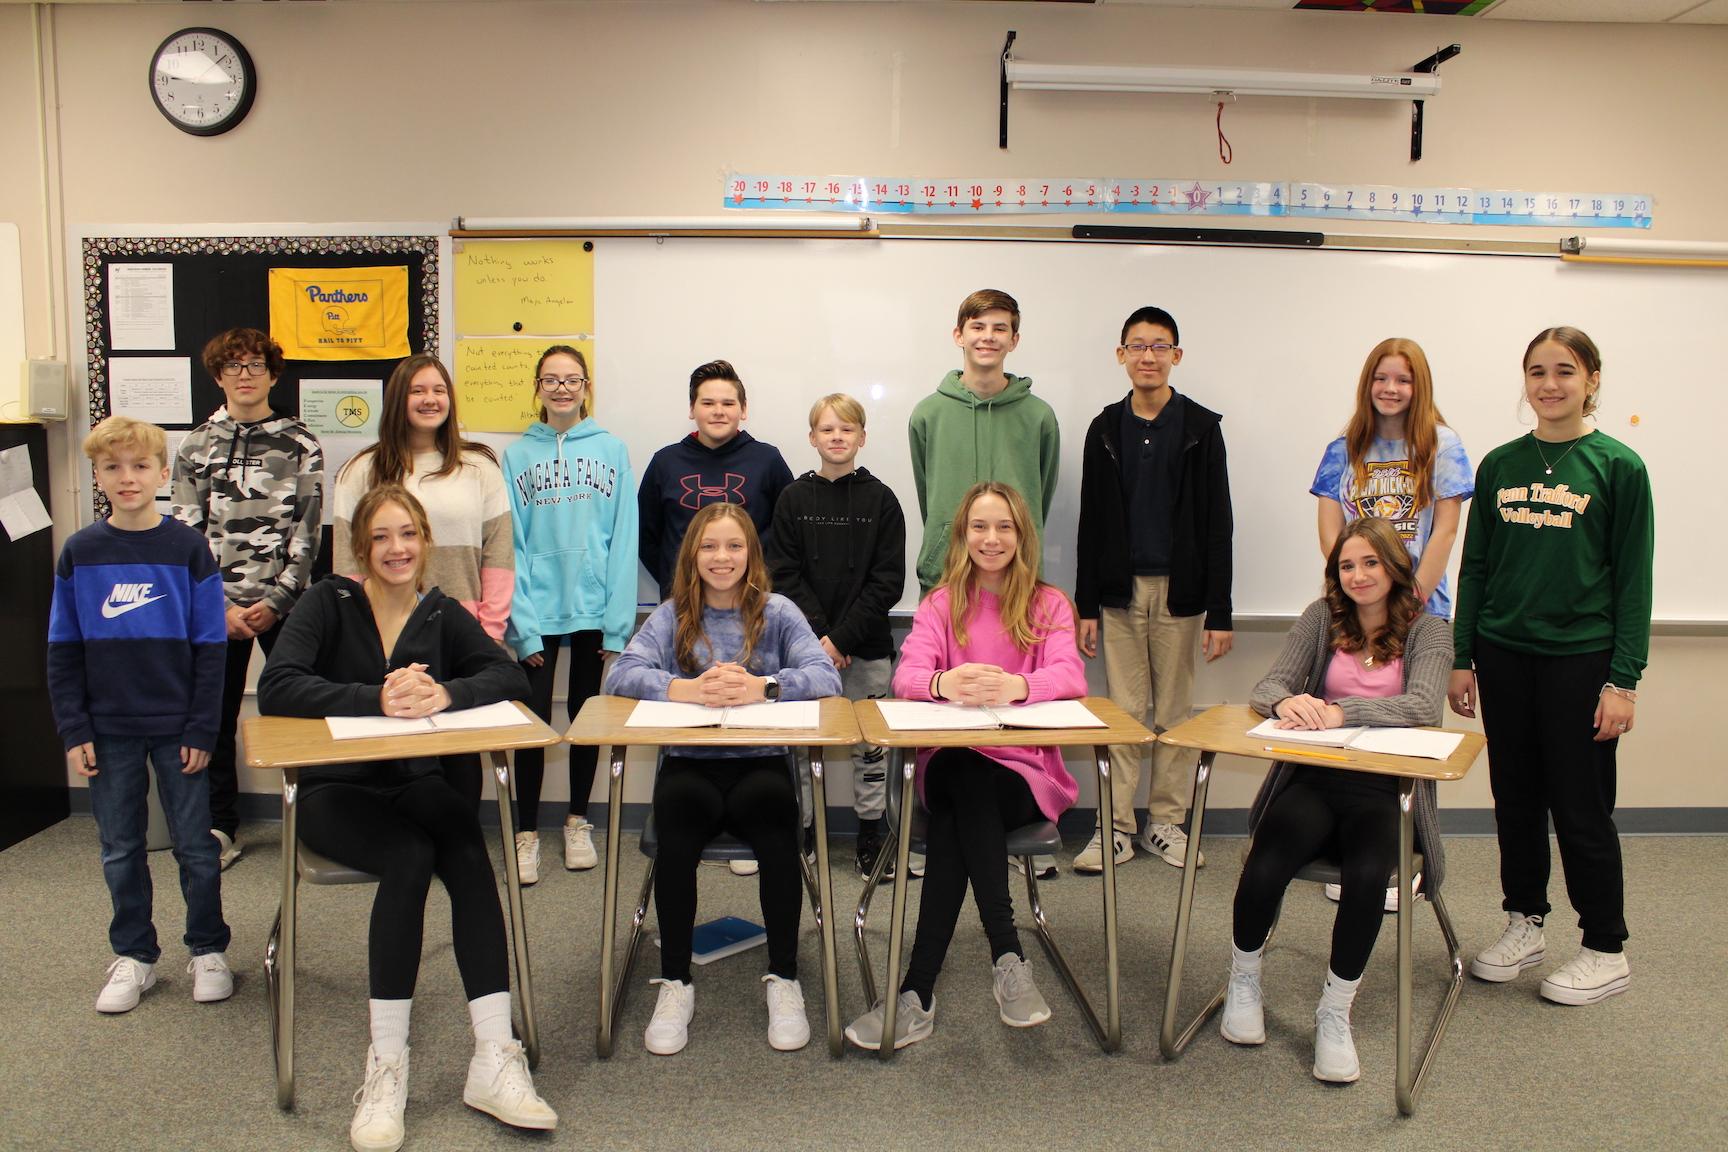 (Front) Delaney Race, Annabell Carvajal, Ava Ruane, Mary Brobst (Back) Bryce Porter, Noah Haslam, Natalie Southern, Haleigh Weagraff, Connor Schmidt, Jacob Binnion, Grant Alexander, Benjamin Wei, Kelsie Wise, Keira Parks (Not pictured: Melodie Funk, Juliet Mastroianni, Miles Morocco, Charlie Thomas)